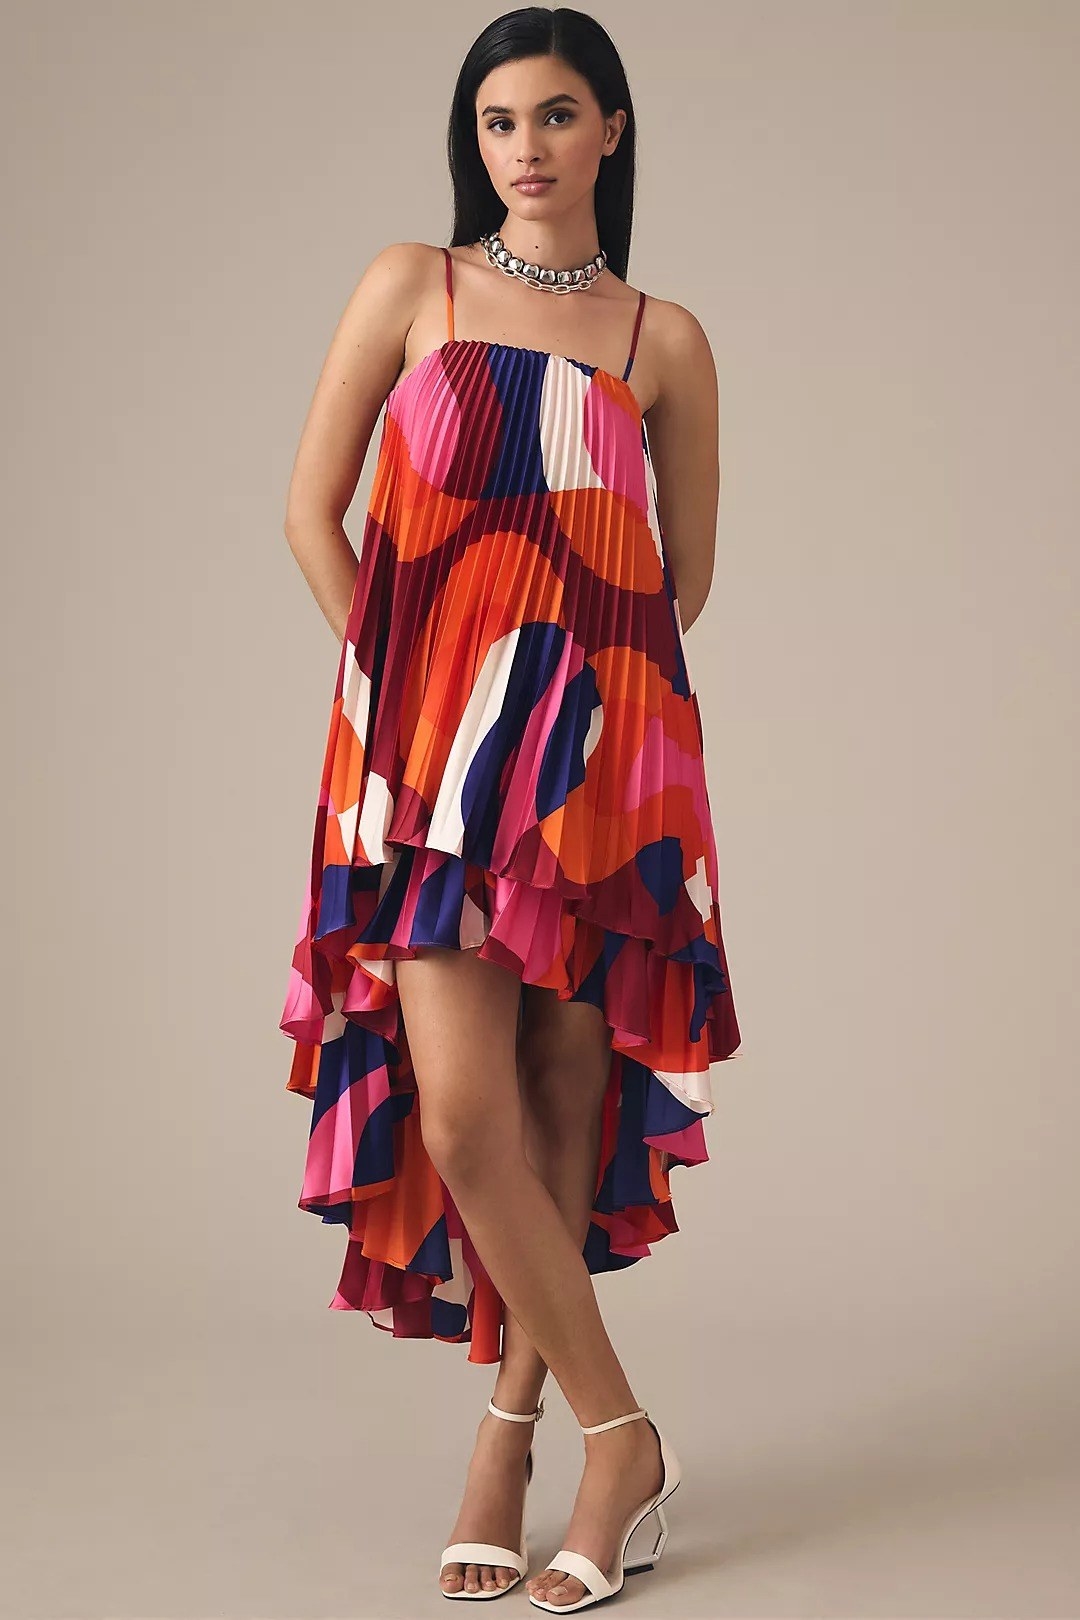 model wearing the tiered multicolored dress